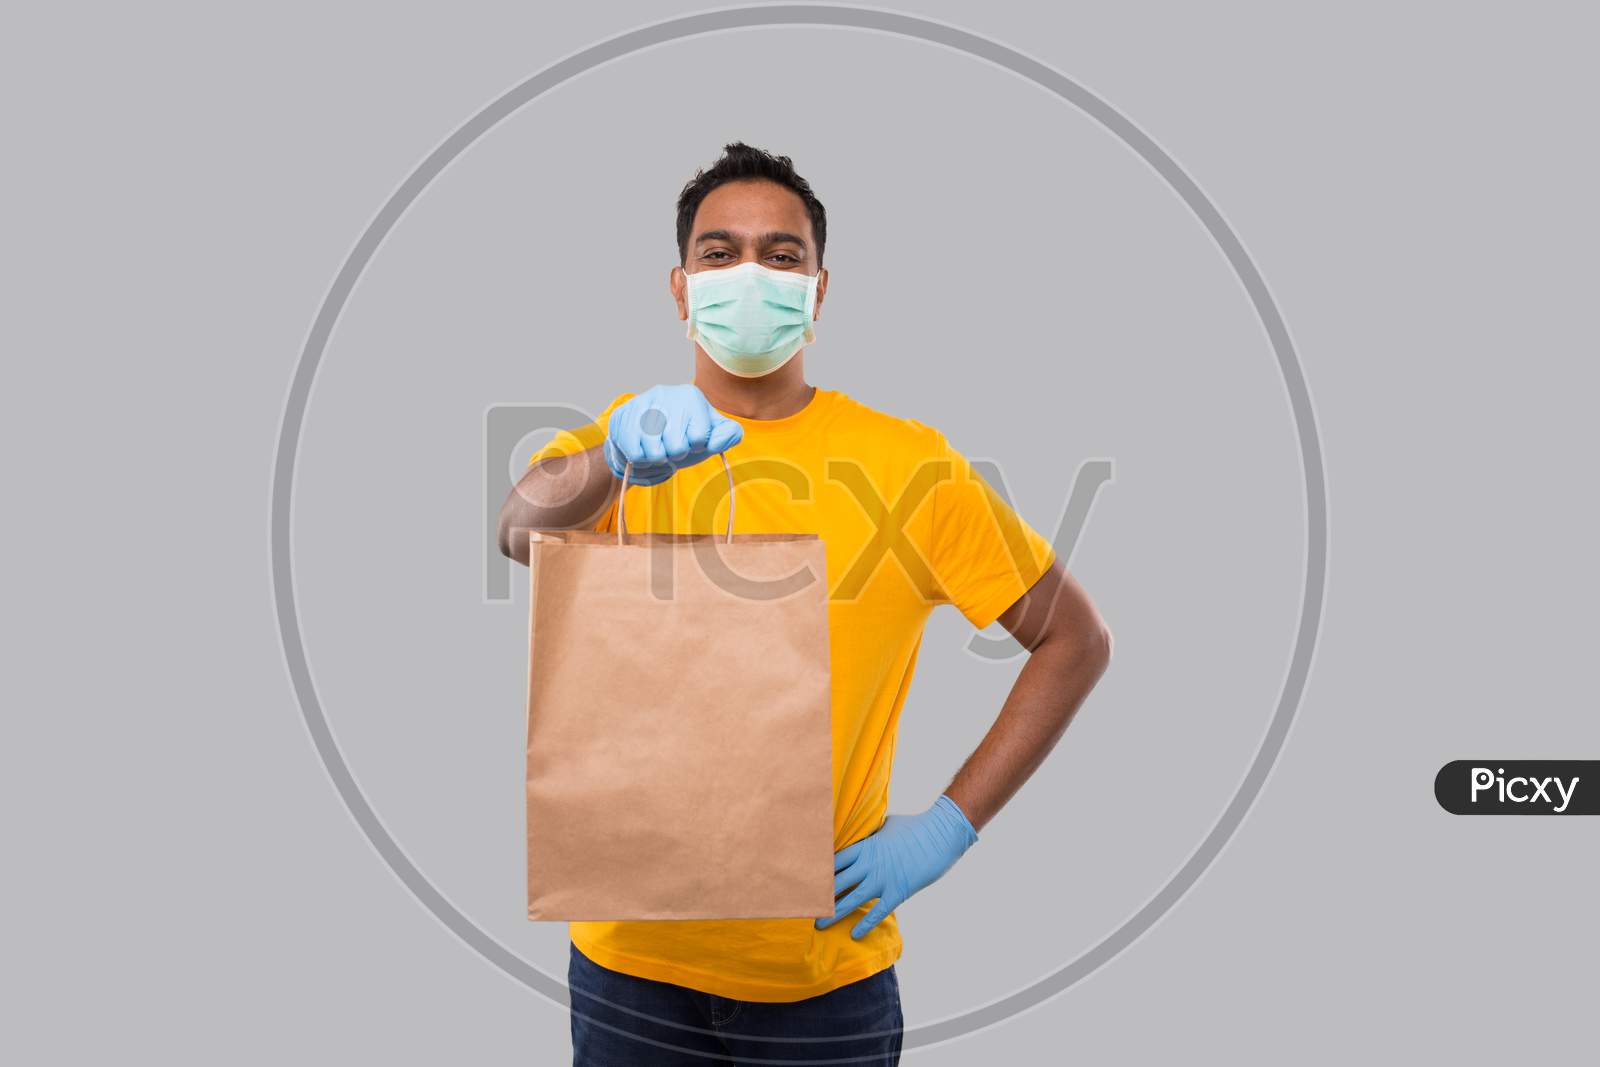 Delivery Man With Paper Bag In Hands Wearing Medical Mask And Gloves Isolated. Yellow Uniform Indian Delivery Boy. Home Food Delivery. Paper Bag